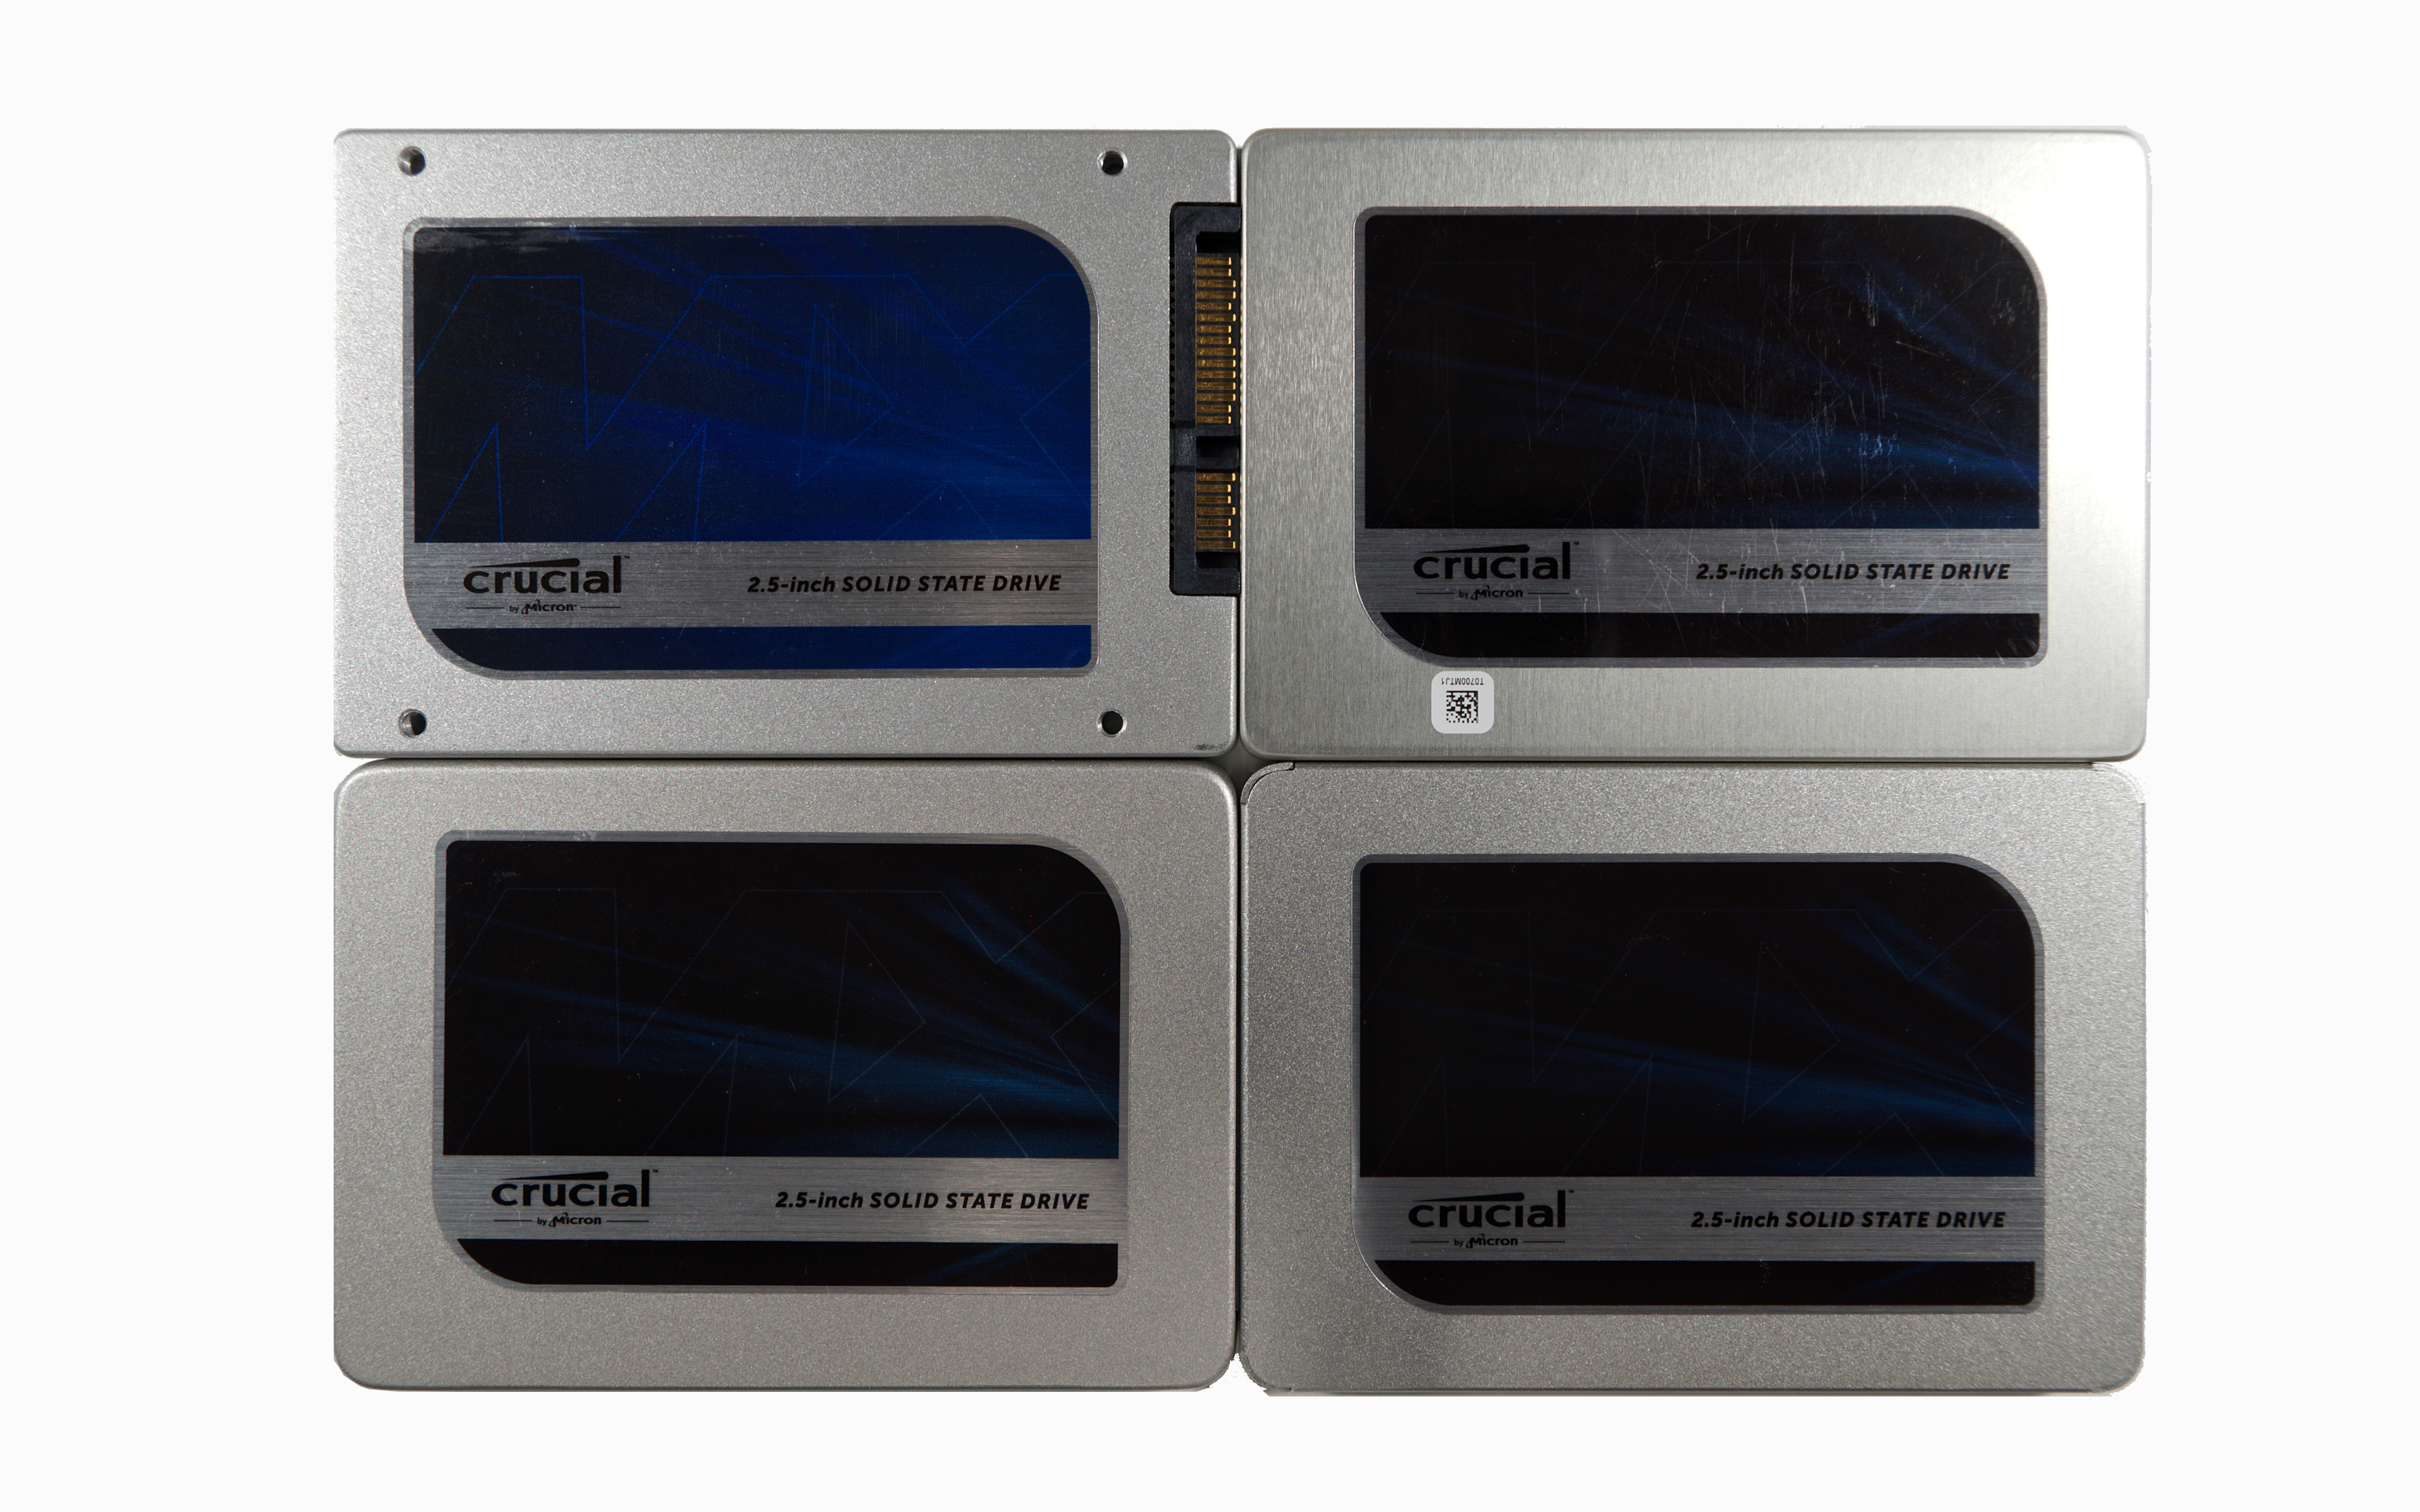 The Crucial MX500 SSD Review: Breaking The SATA Mold